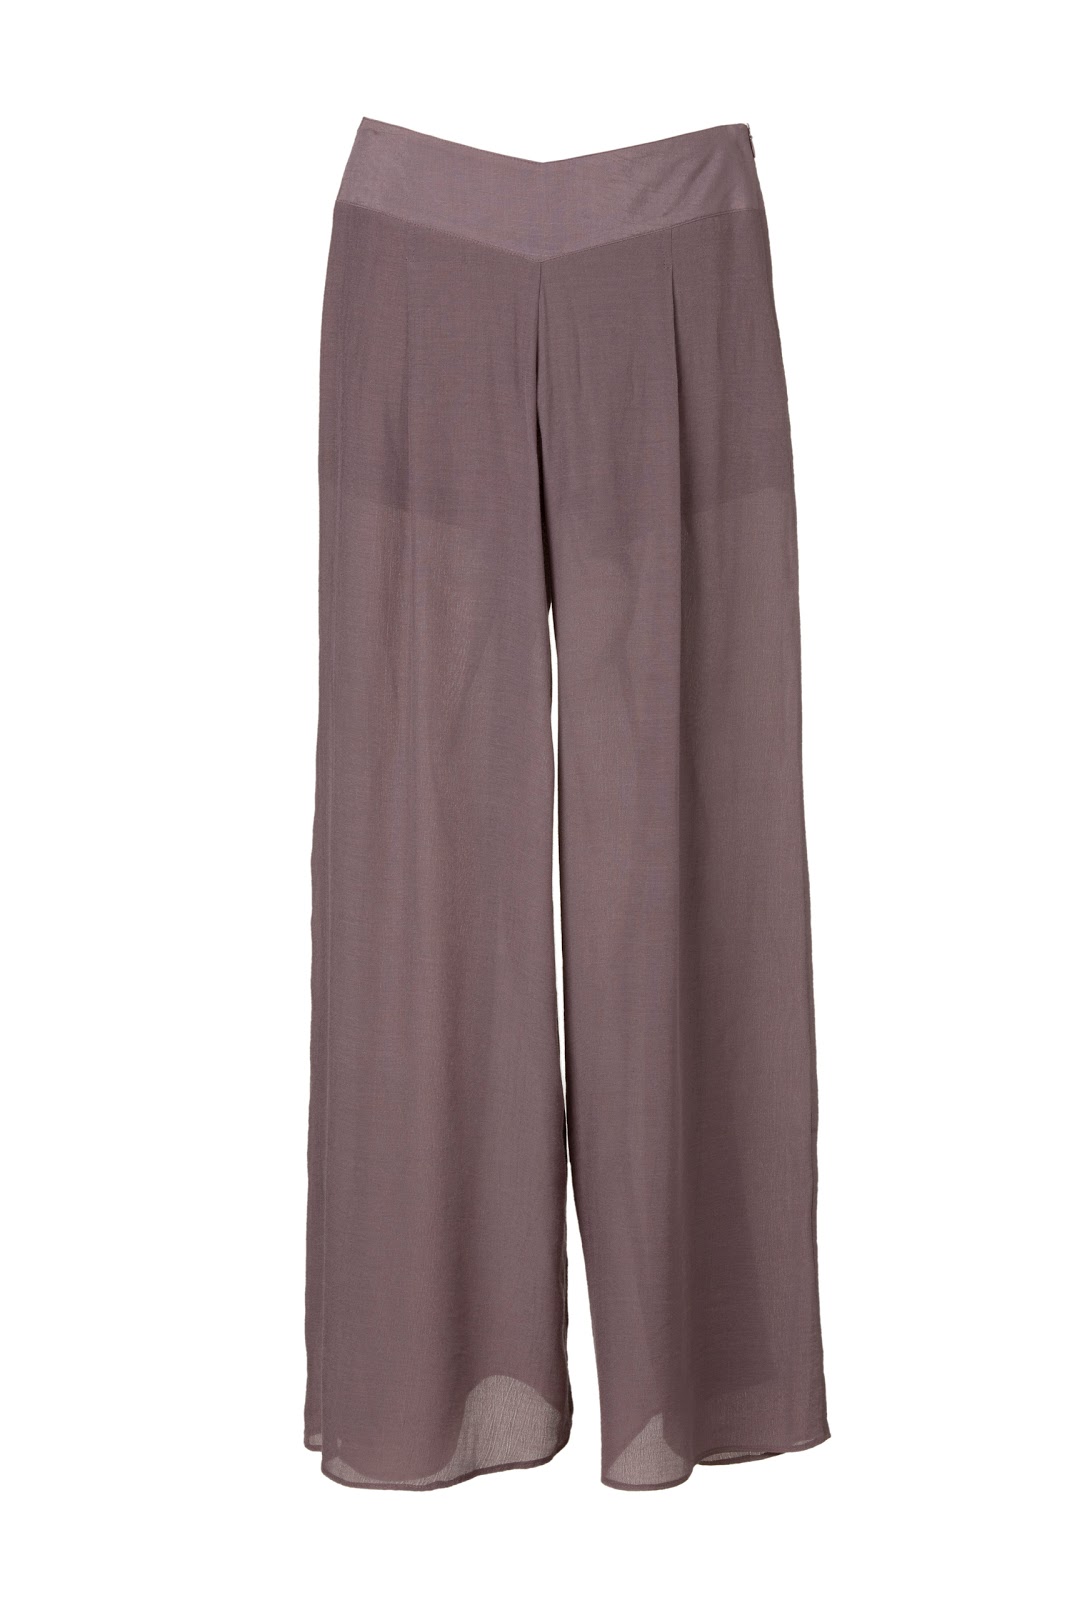 Buys of the Week...........Palazzo Pants & Skin Care | Lainey Style